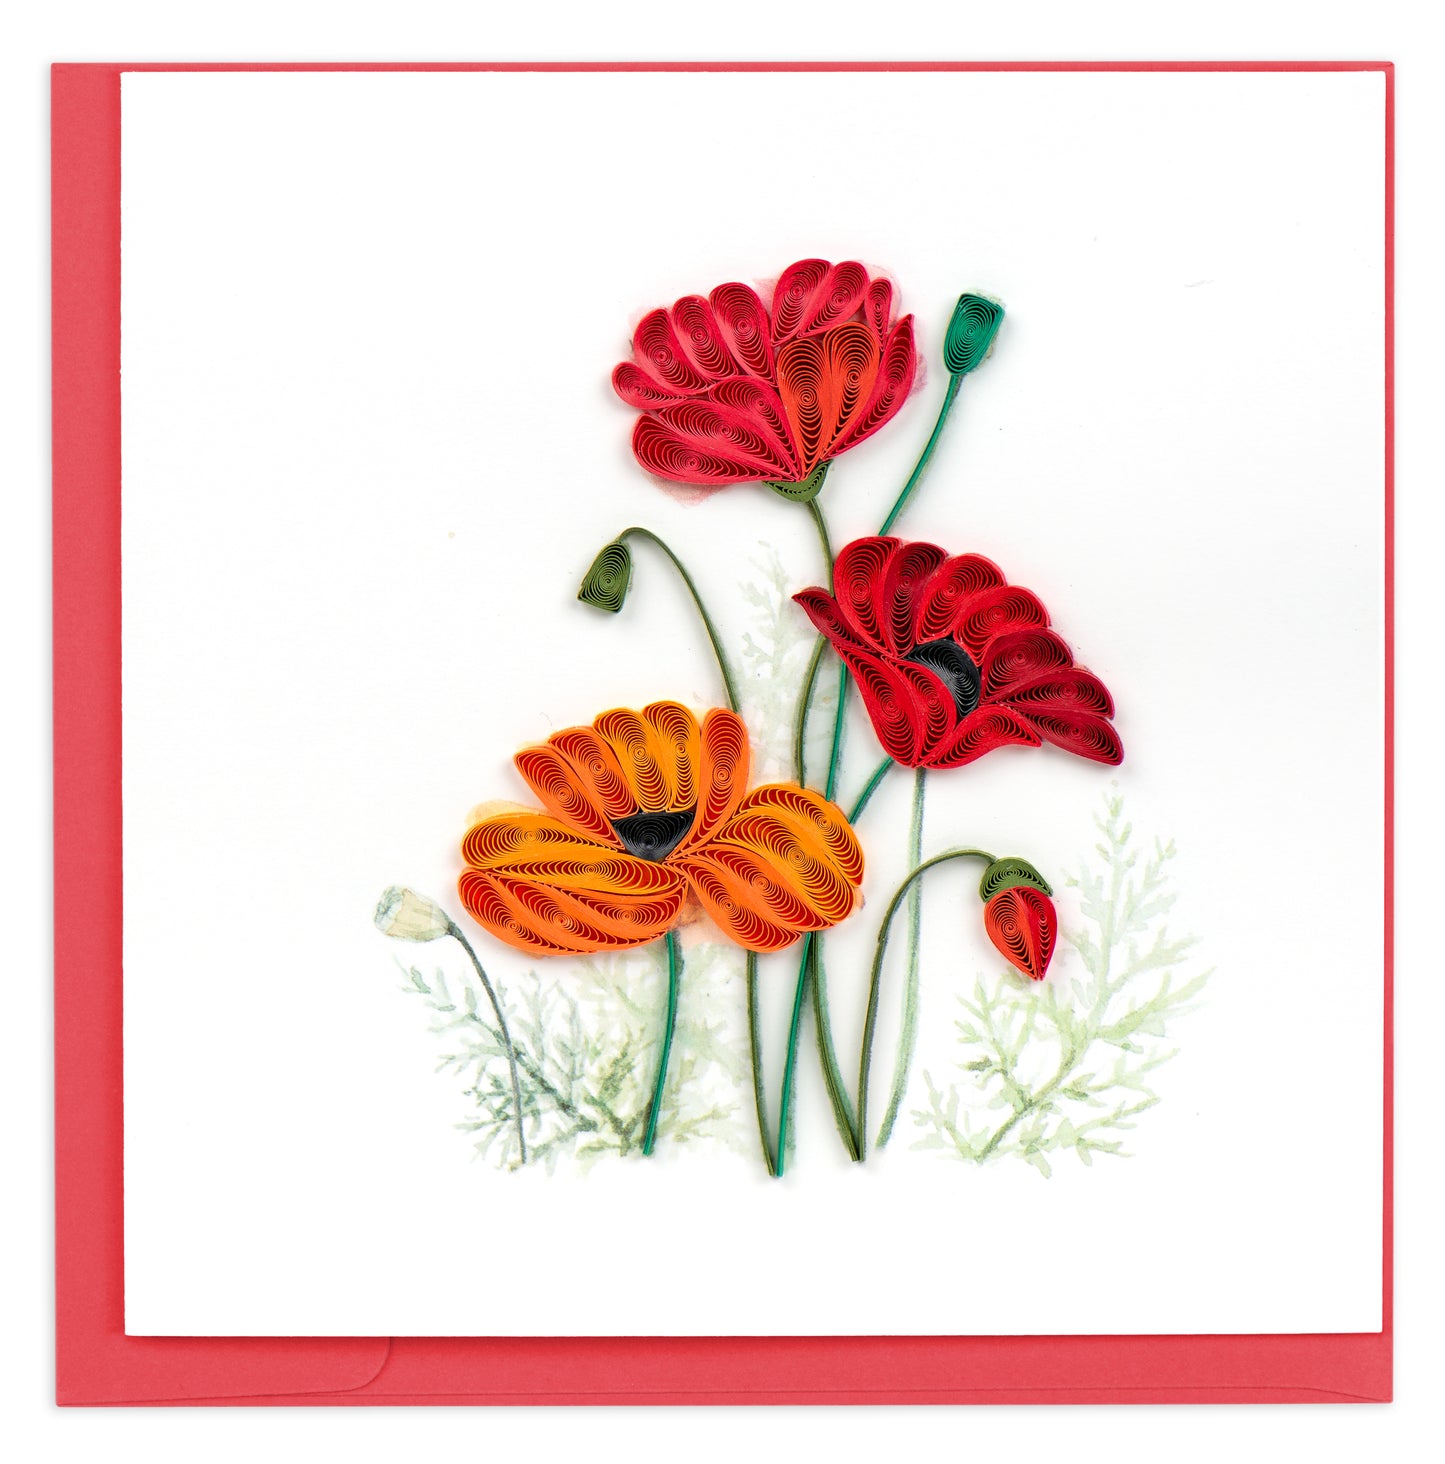 Quilling Red And Orange Peaceful Poppies Hand-Finished Art Greeting Card